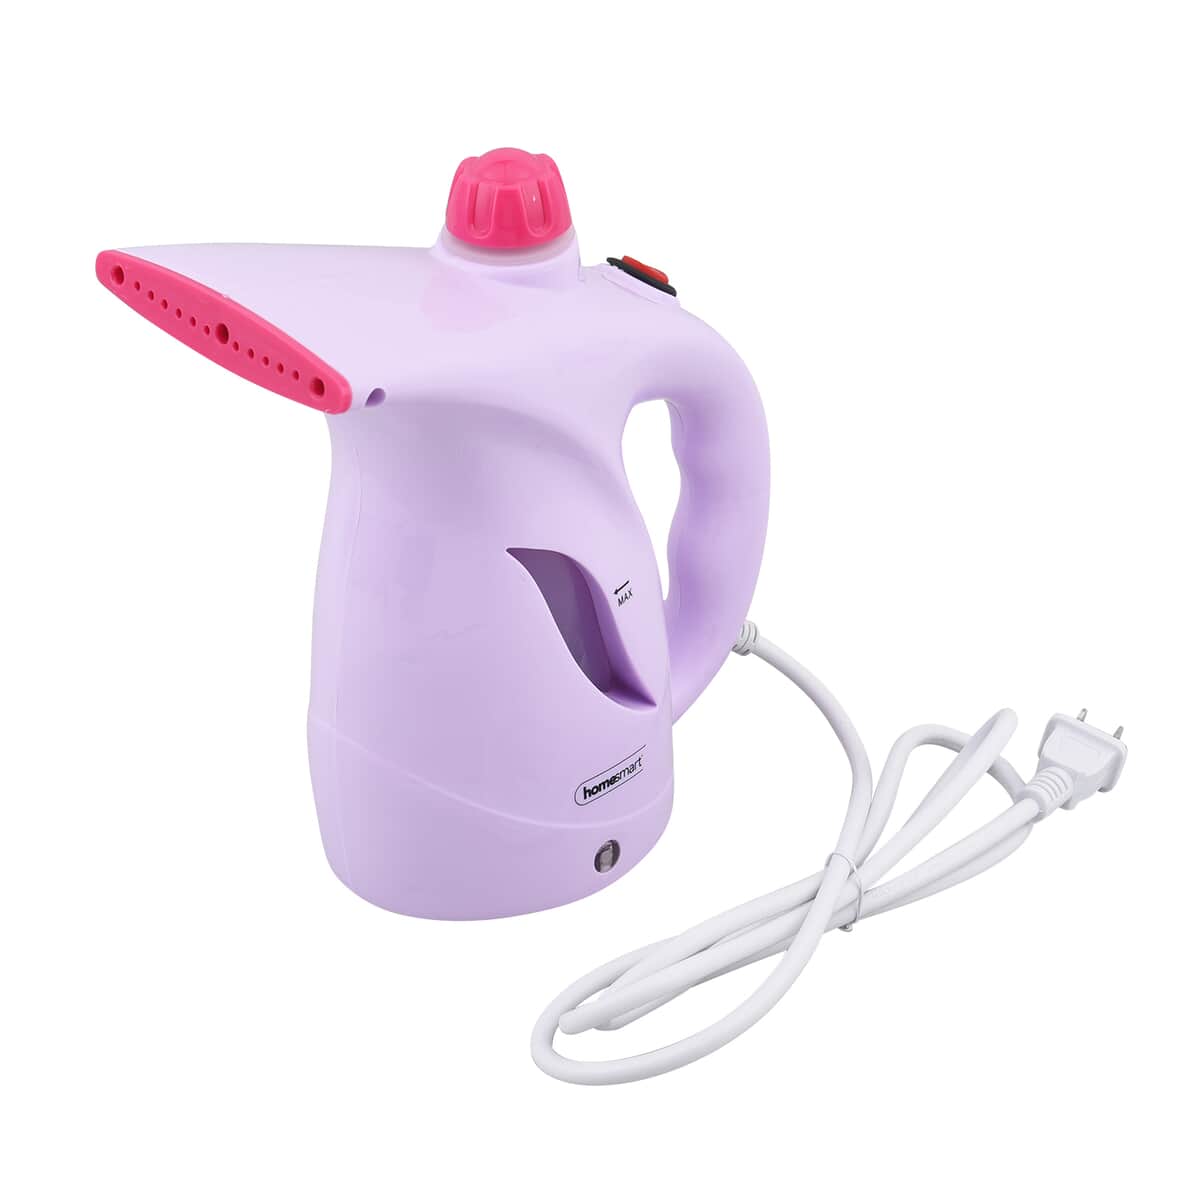 HOMESMART Pink Garment Steamer with Water Tank, Brush and Electrostatic Brush (3.54"x6.69"x8.46") (200ml) image number 0